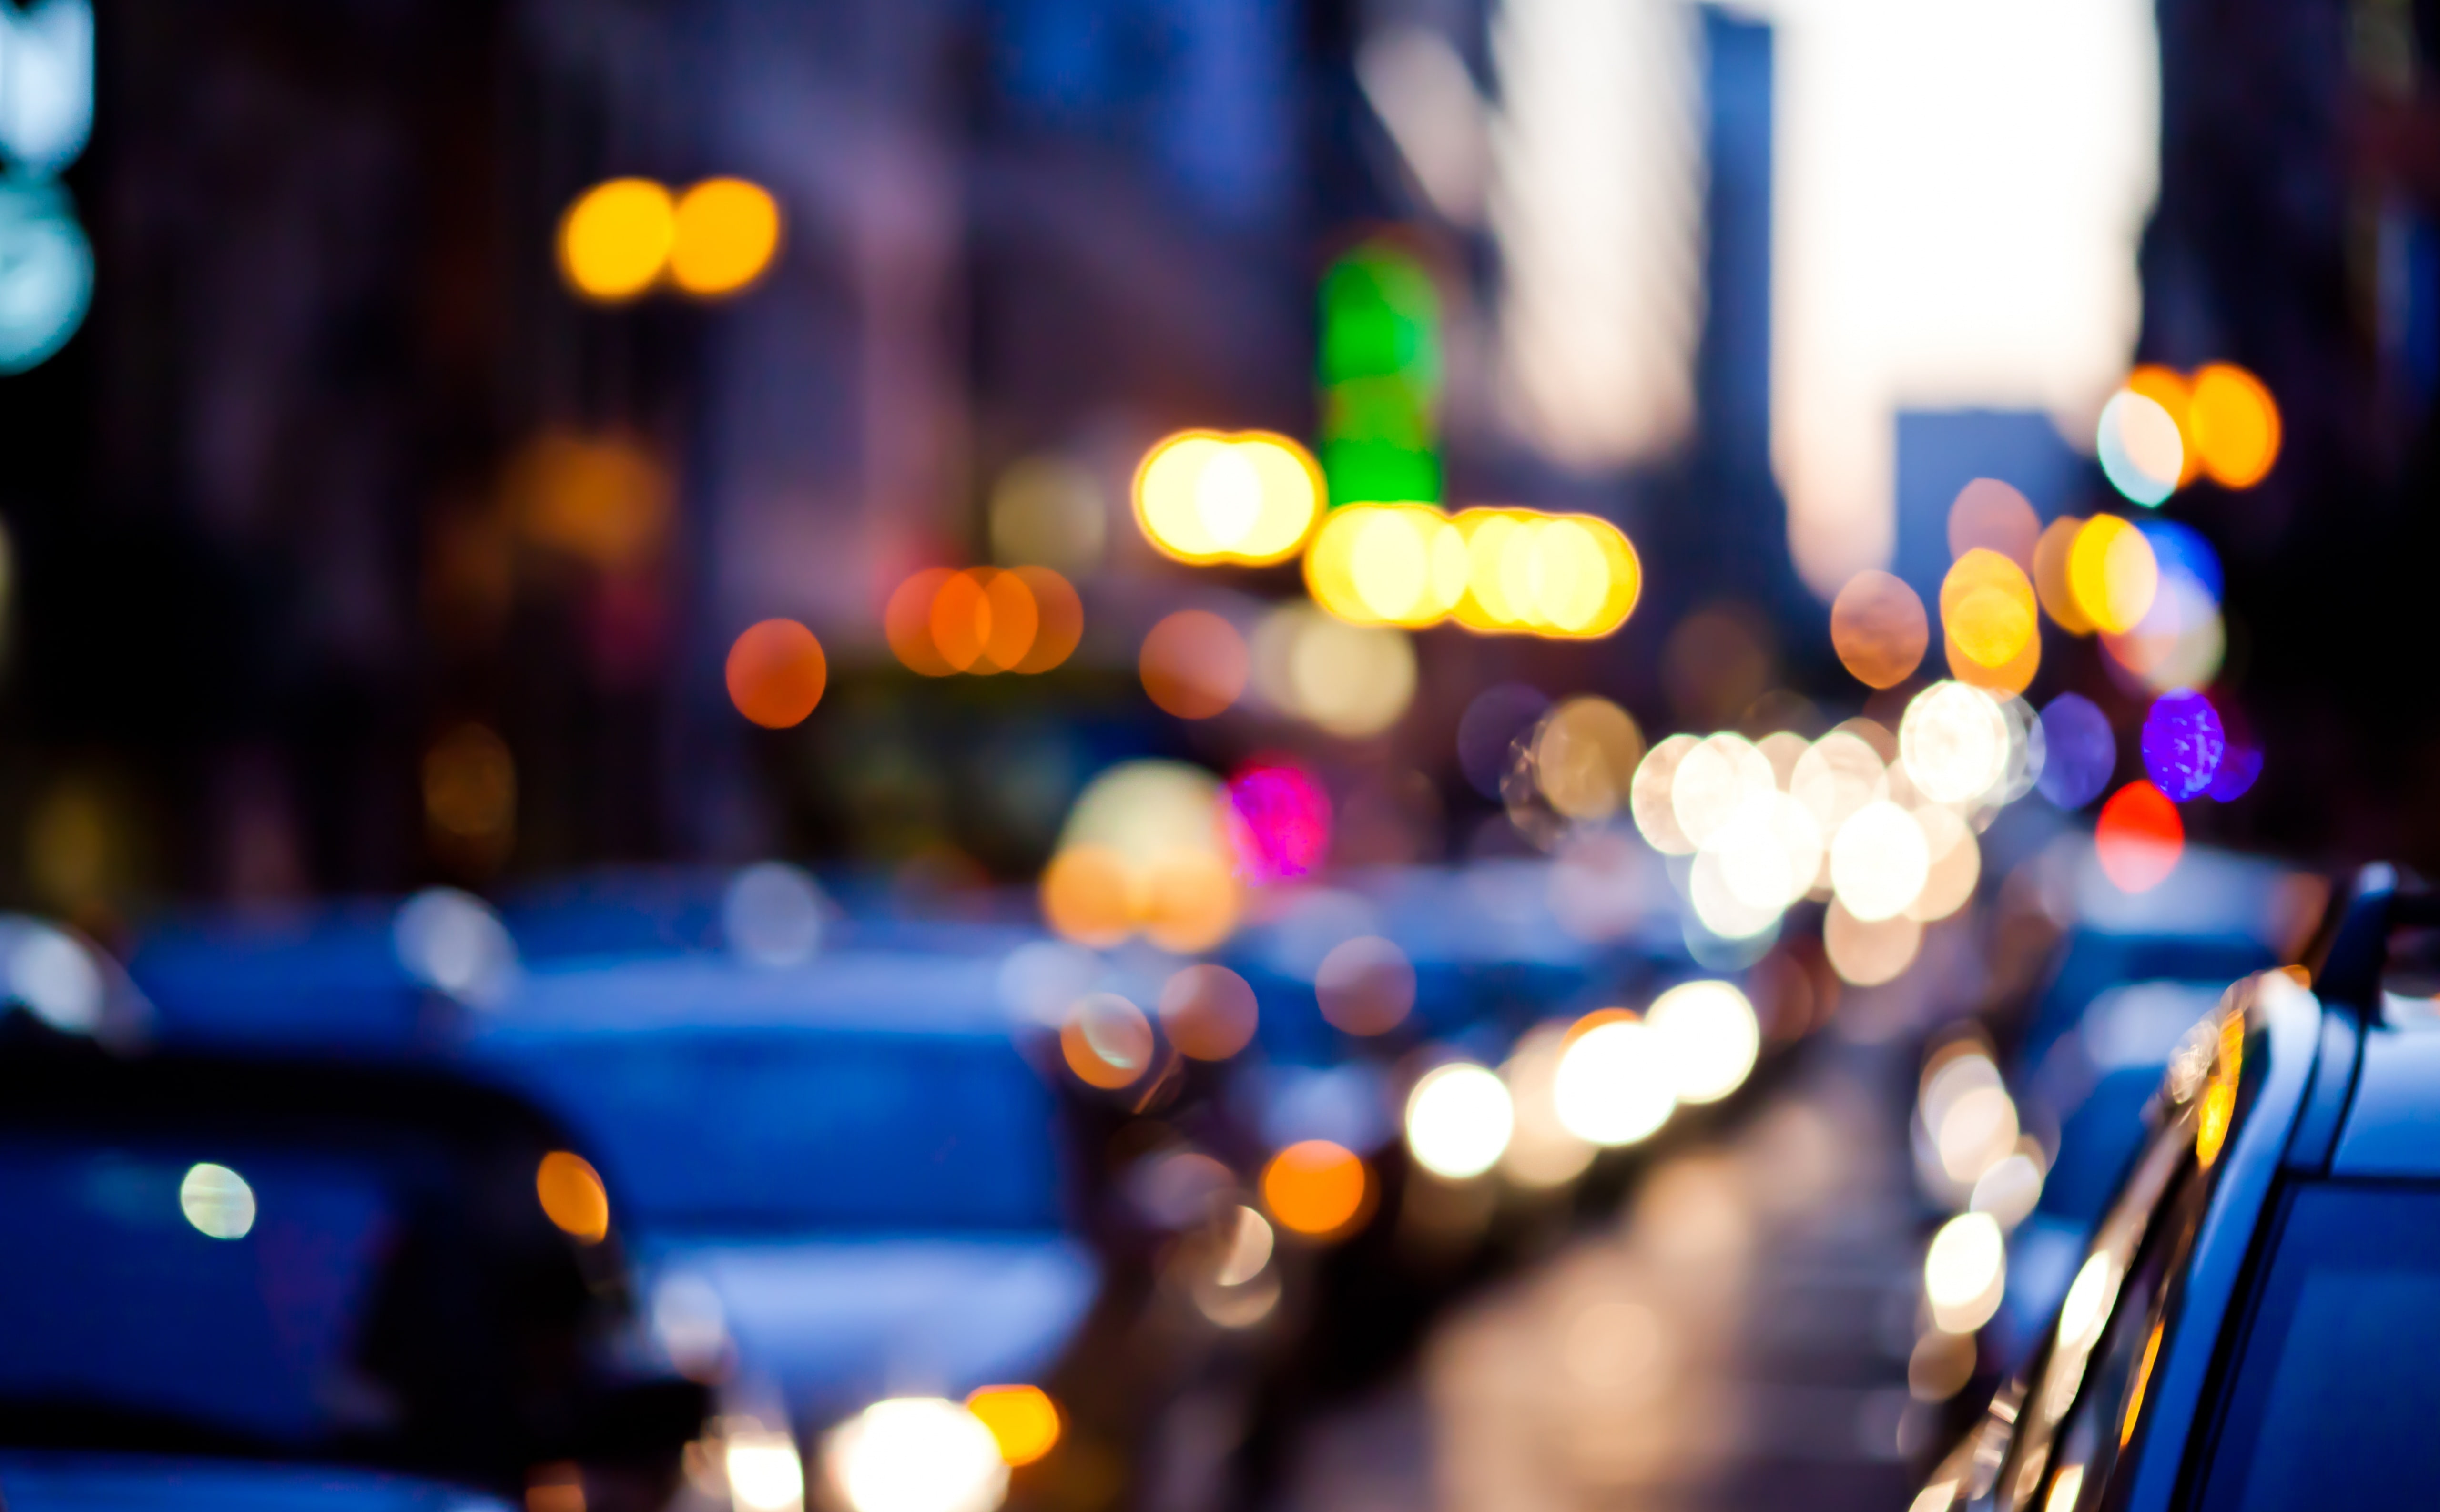 All I Have To Do Is Dream, bokeh photography of street traffic